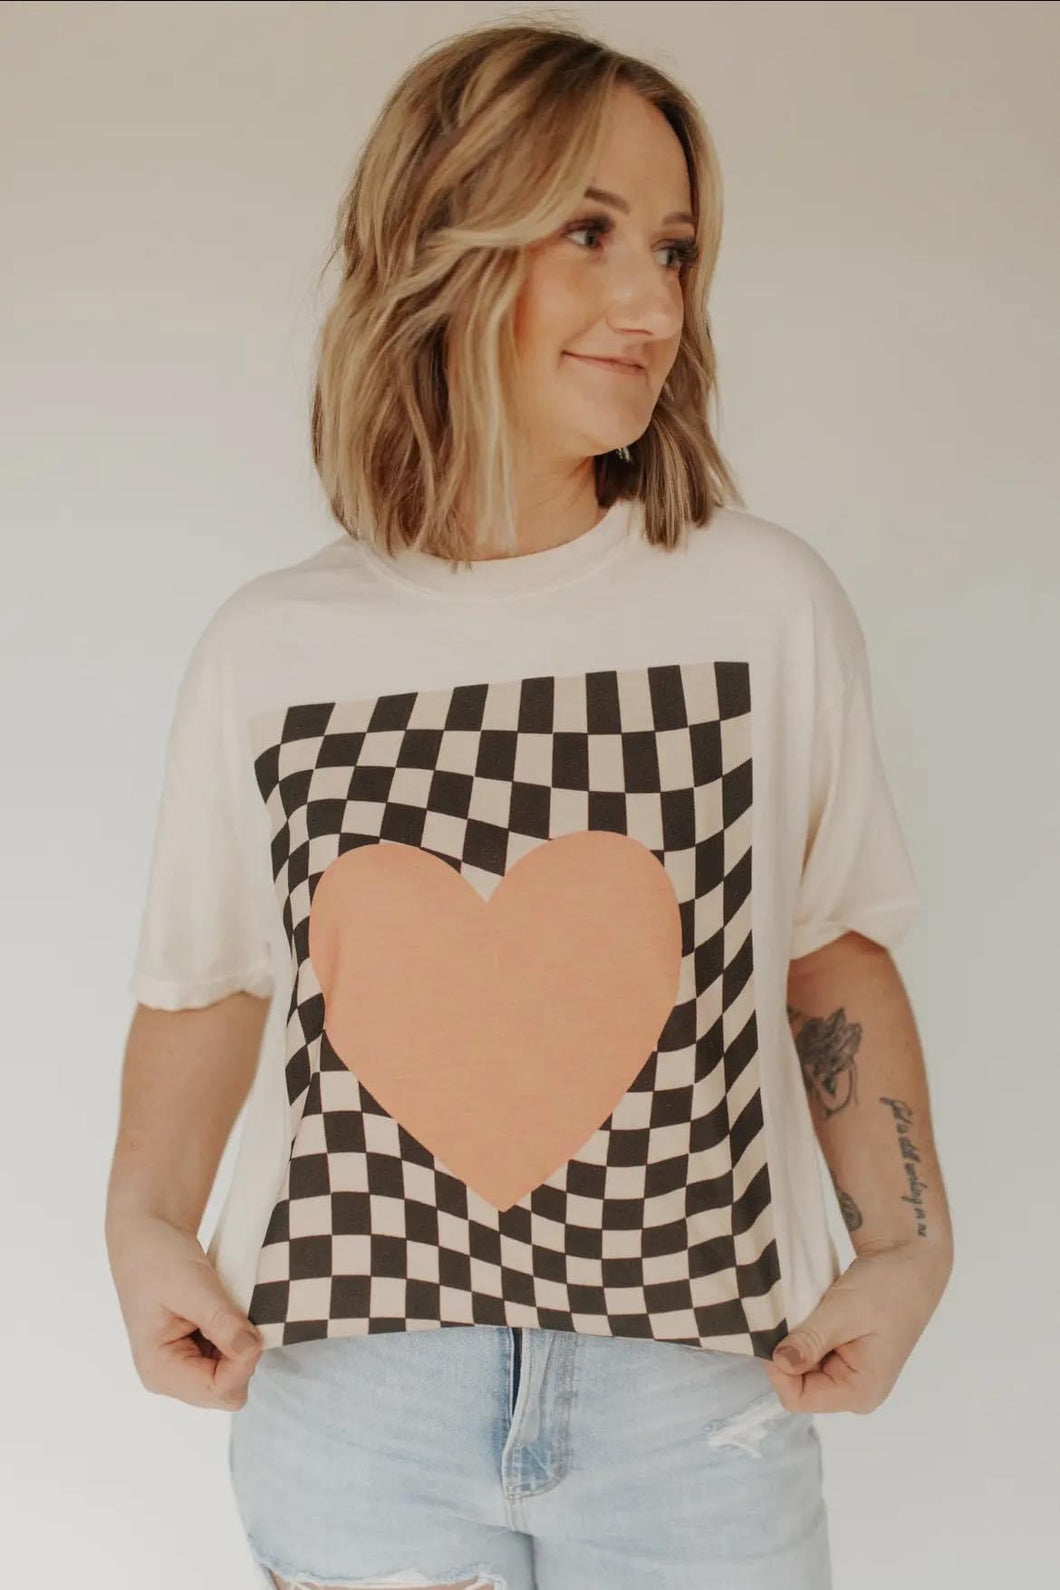 Checkered Hearts Graphic Tees